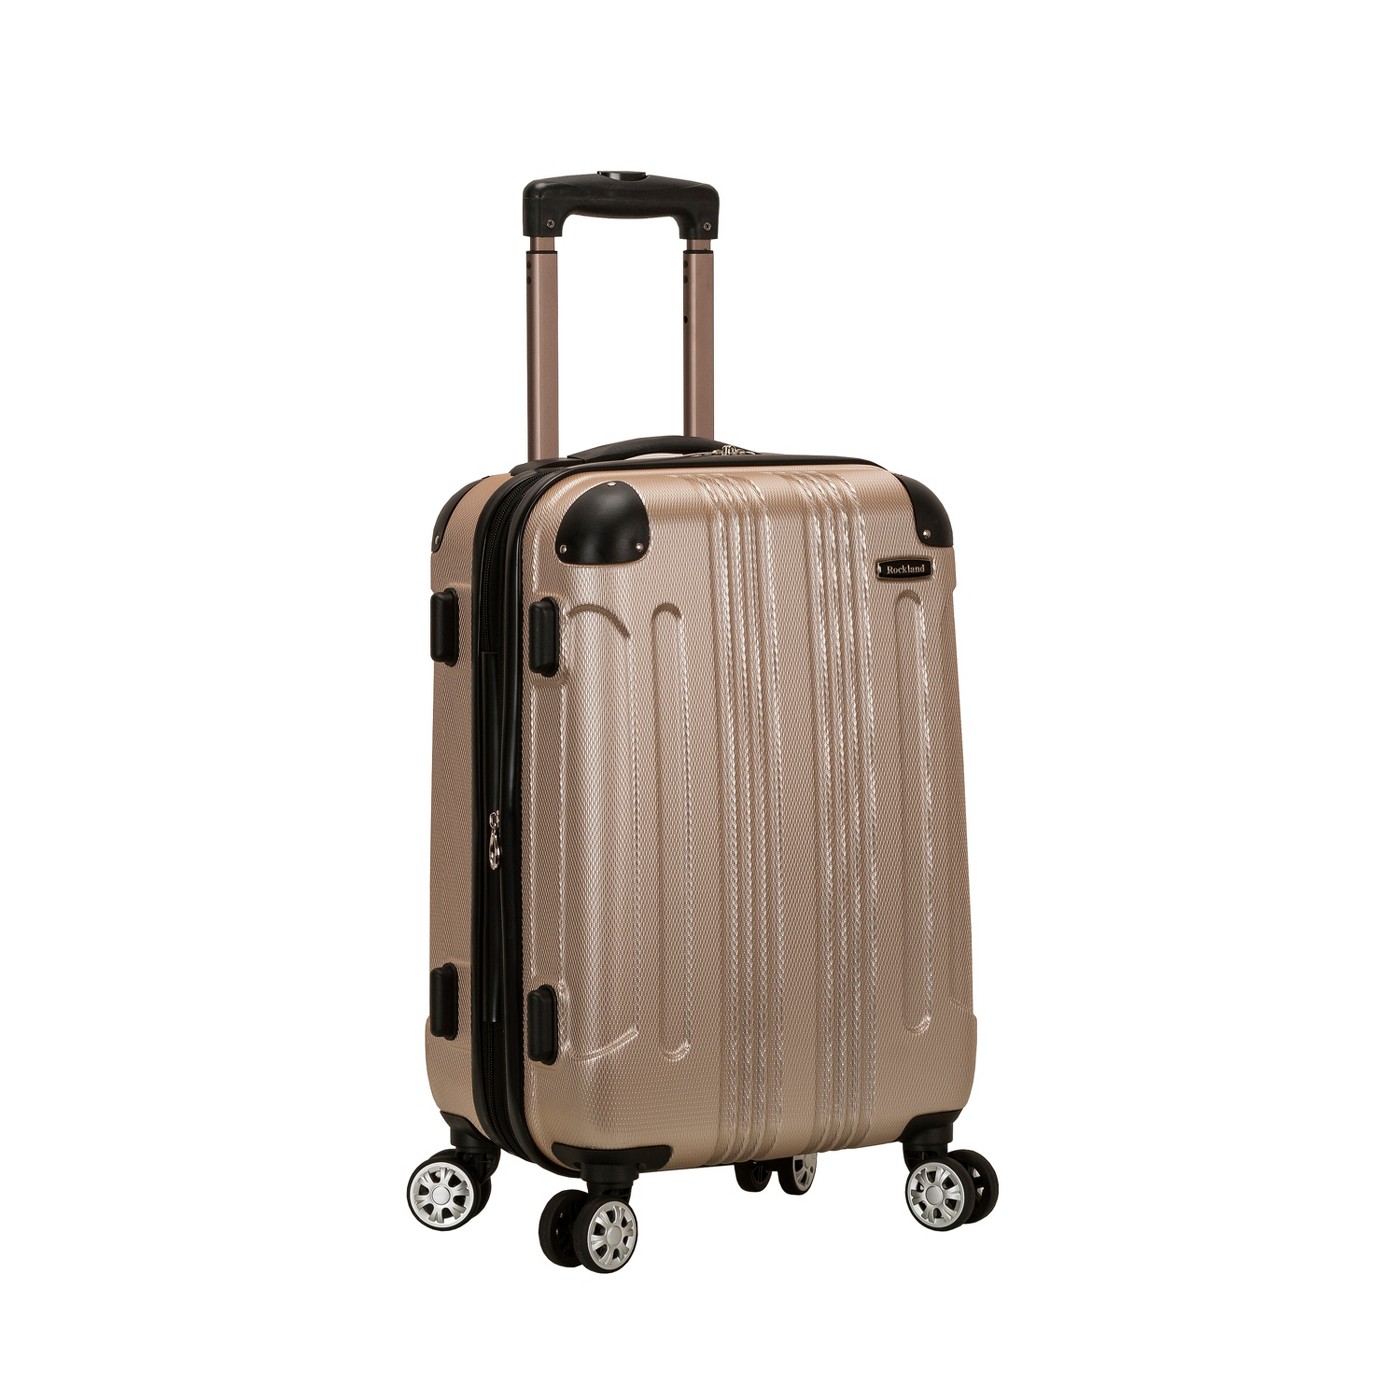 Rockland Sonic 20" Expandable Hardside Carry On Suitcase - Champagne - image 1 of 5